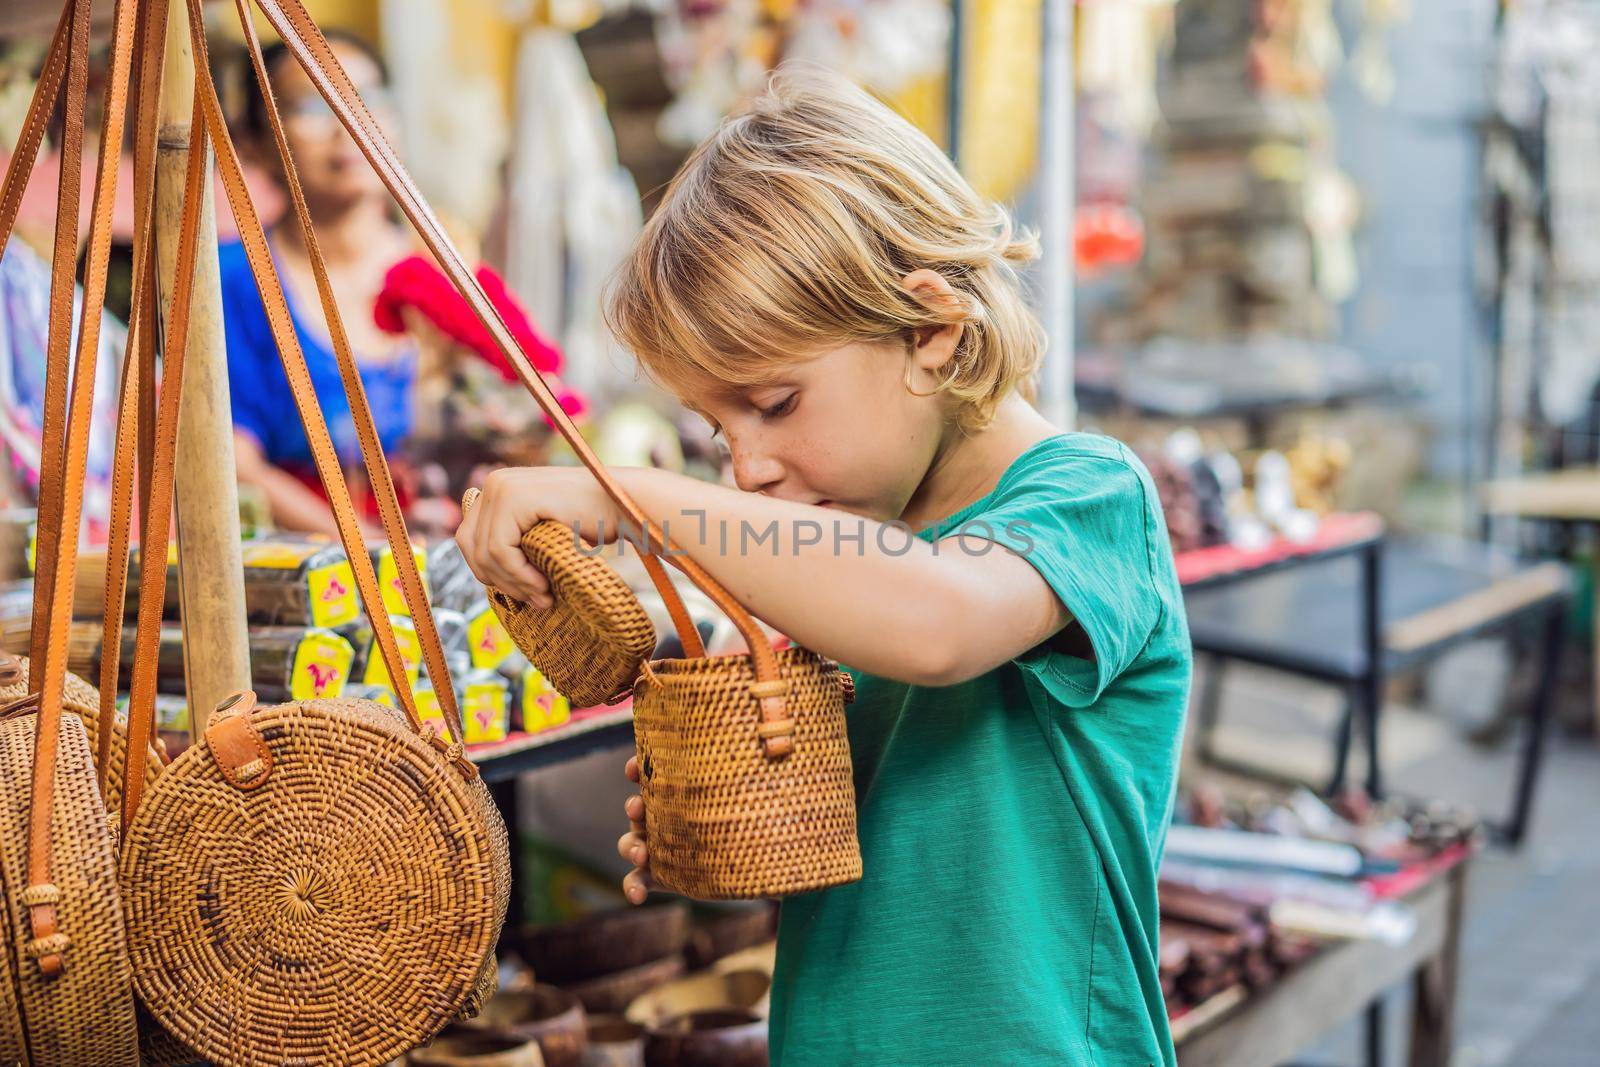 Boy at a market in Ubud, Bali. Typical souvenir shop selling souvenirs and handicrafts of Bali at the famous Ubud Market, Indonesia. Balinese market. Souvenirs of wood and crafts of local residents.